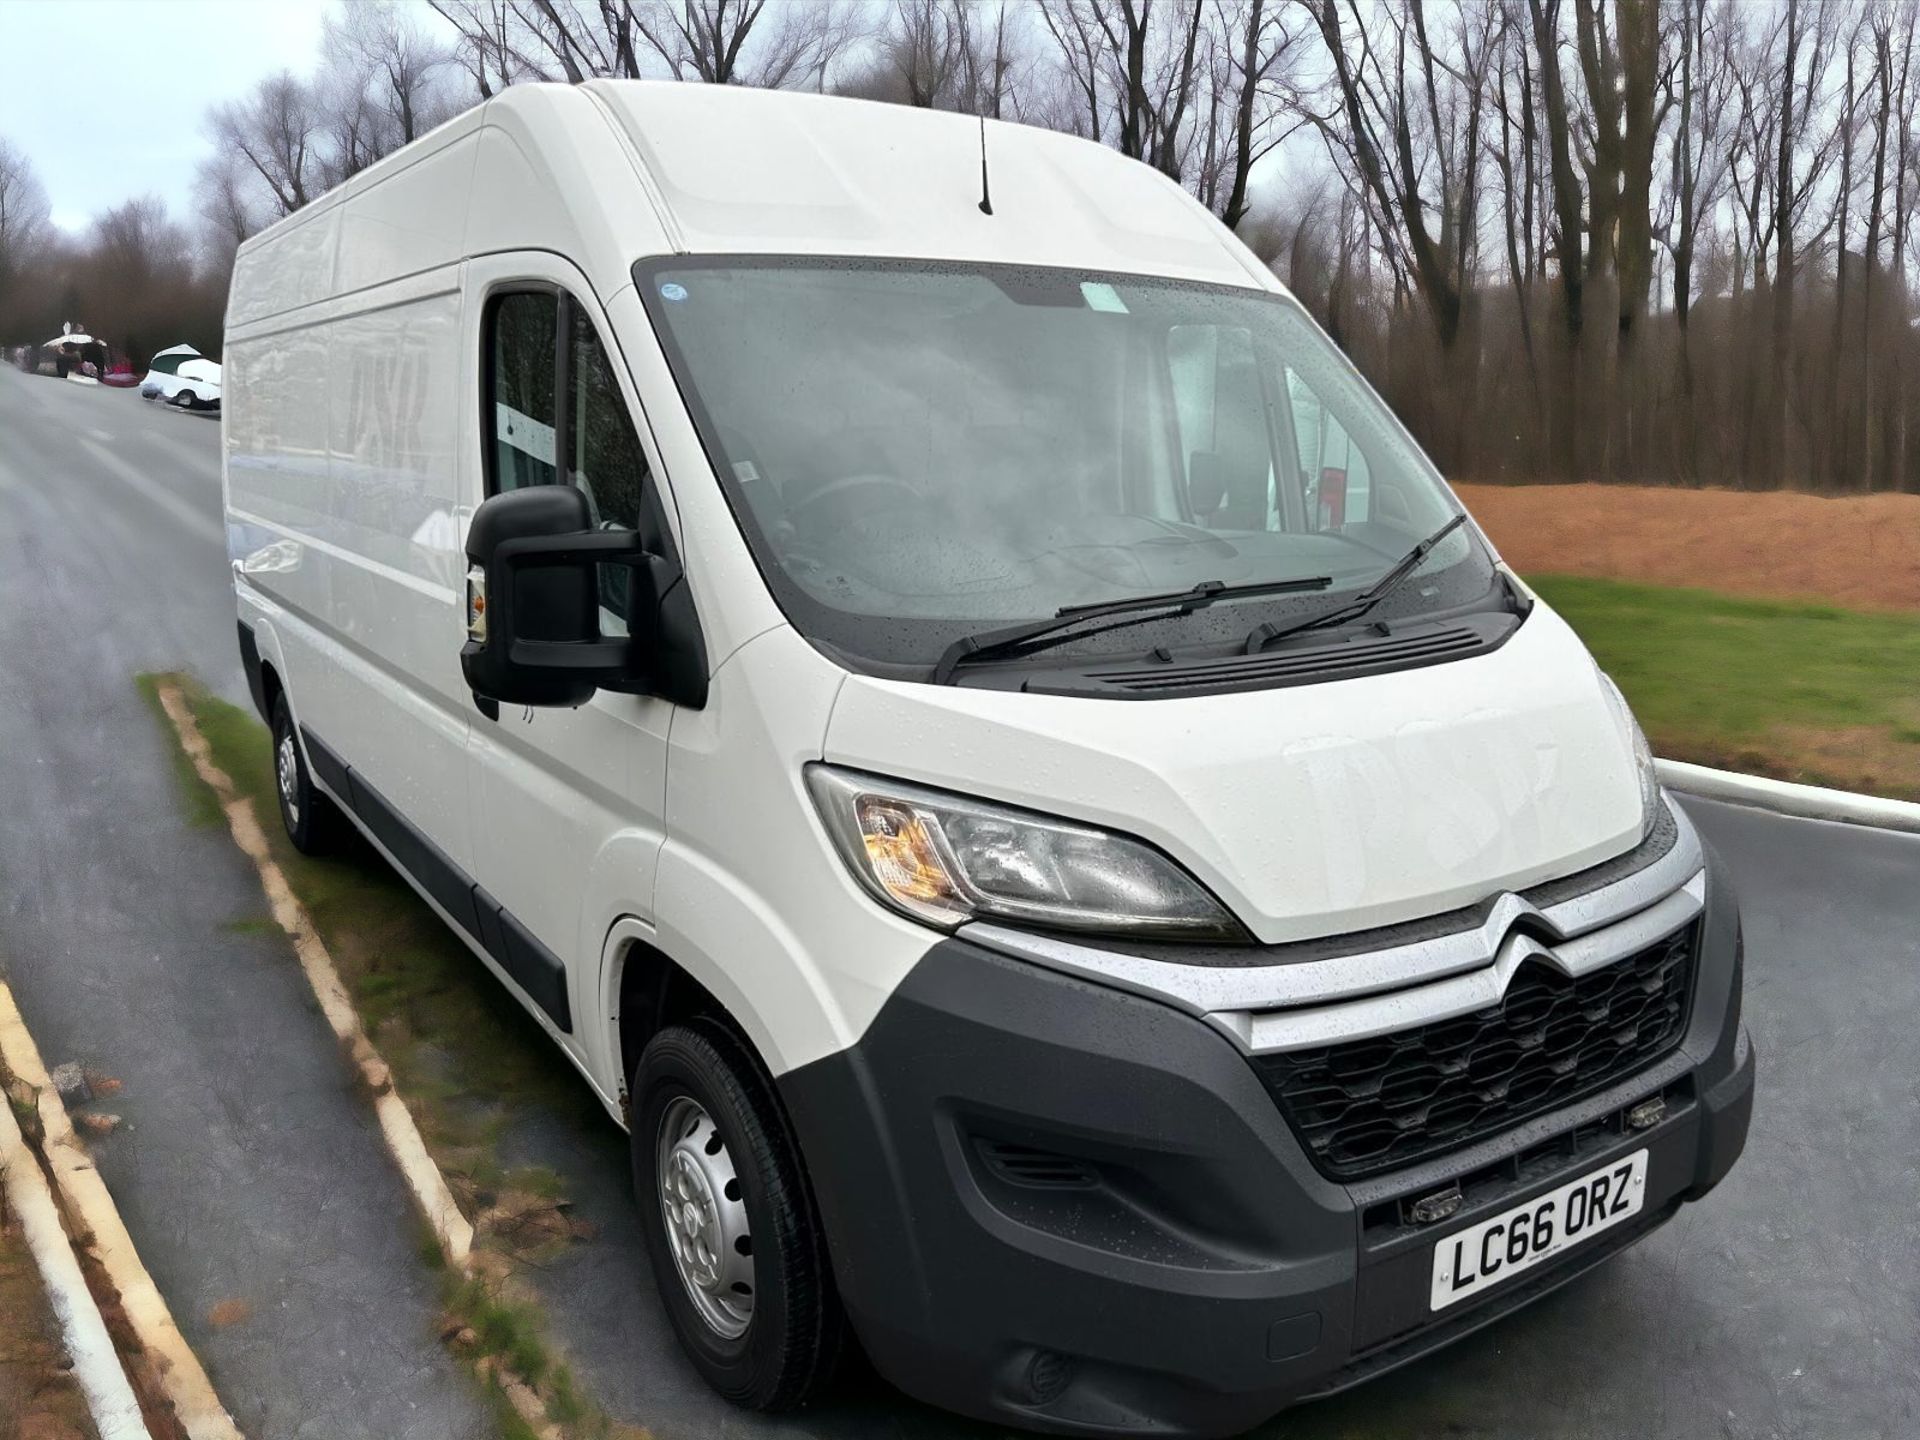 2016-66 REG CITROEN RELAY 35 L3H2 LWB- HPI CLEAR - READY TO GO! - Image 5 of 12